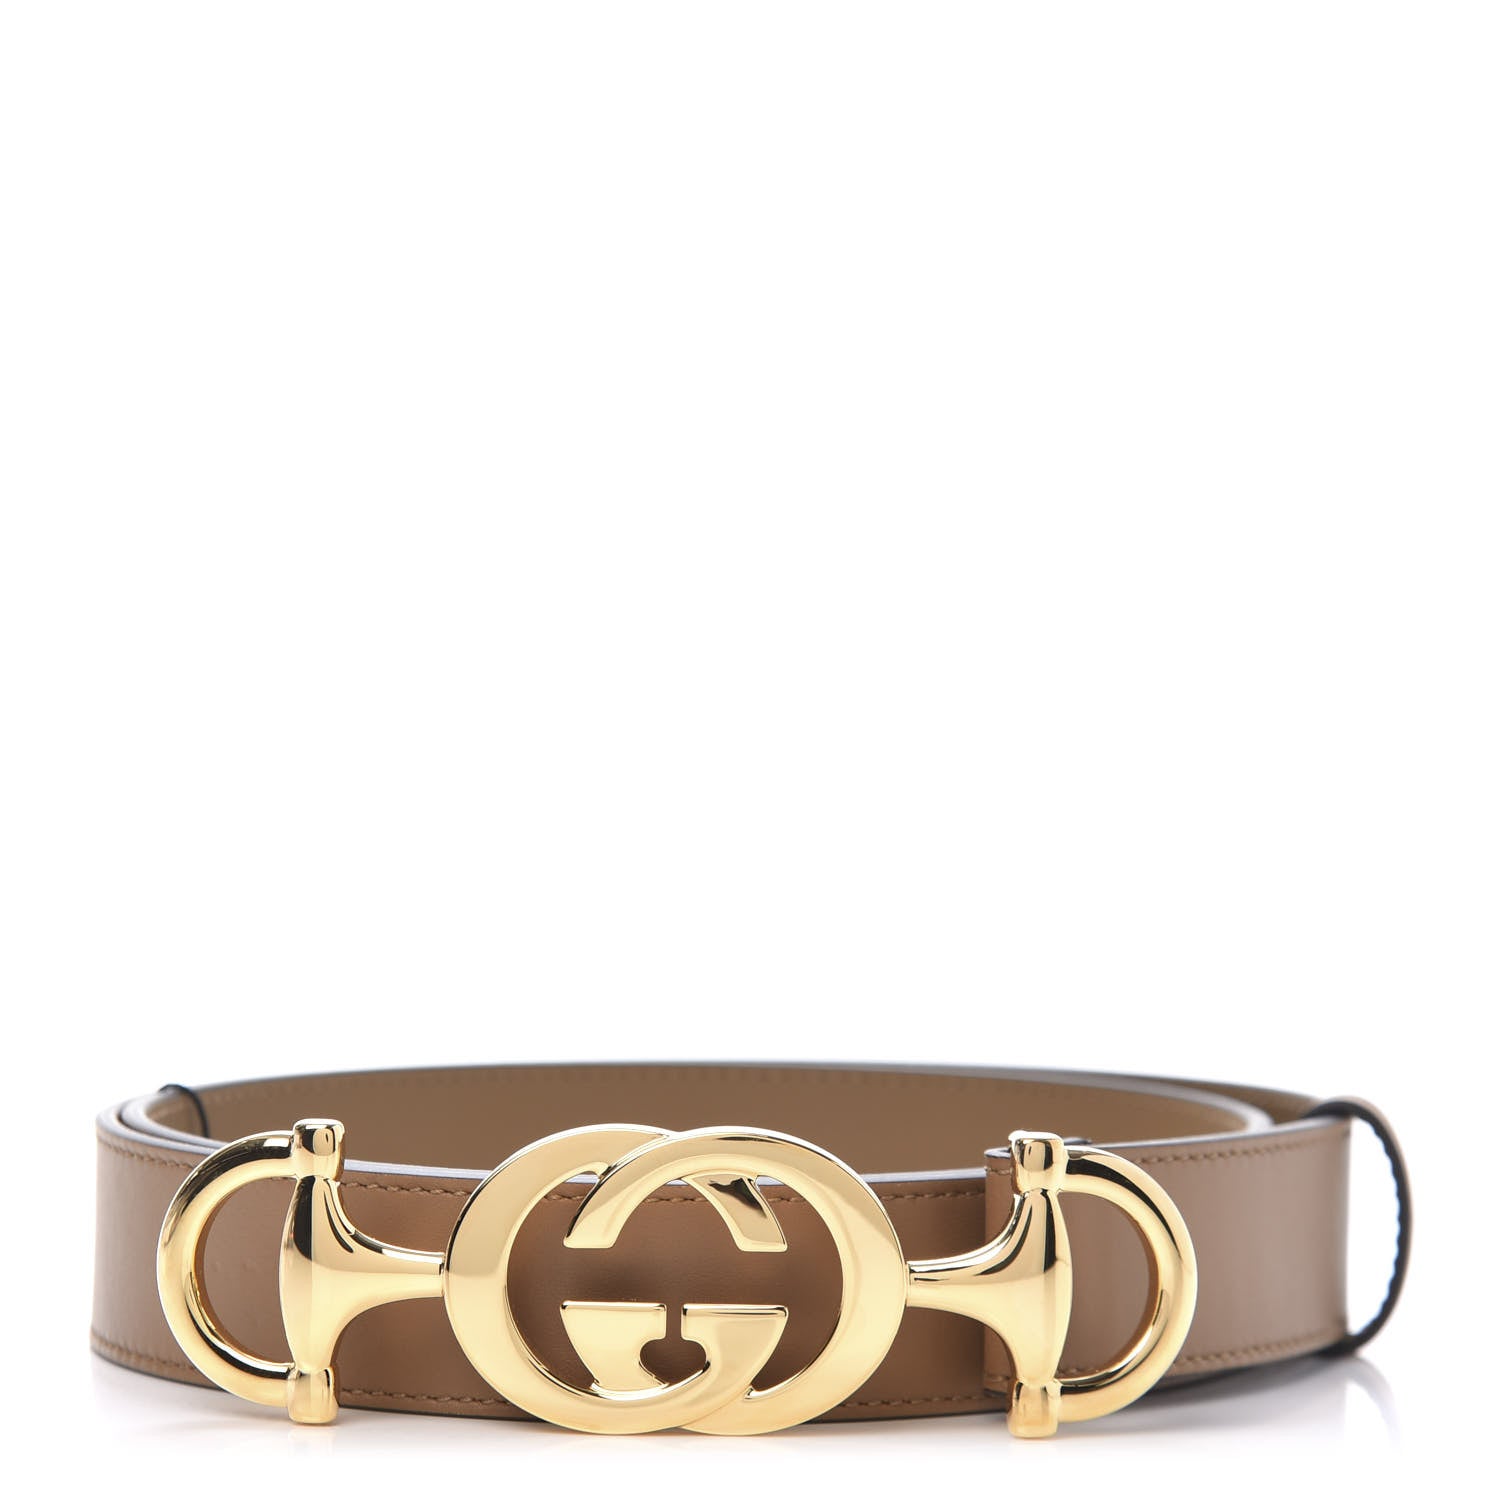 GG Leather Belt in Brown - Gucci